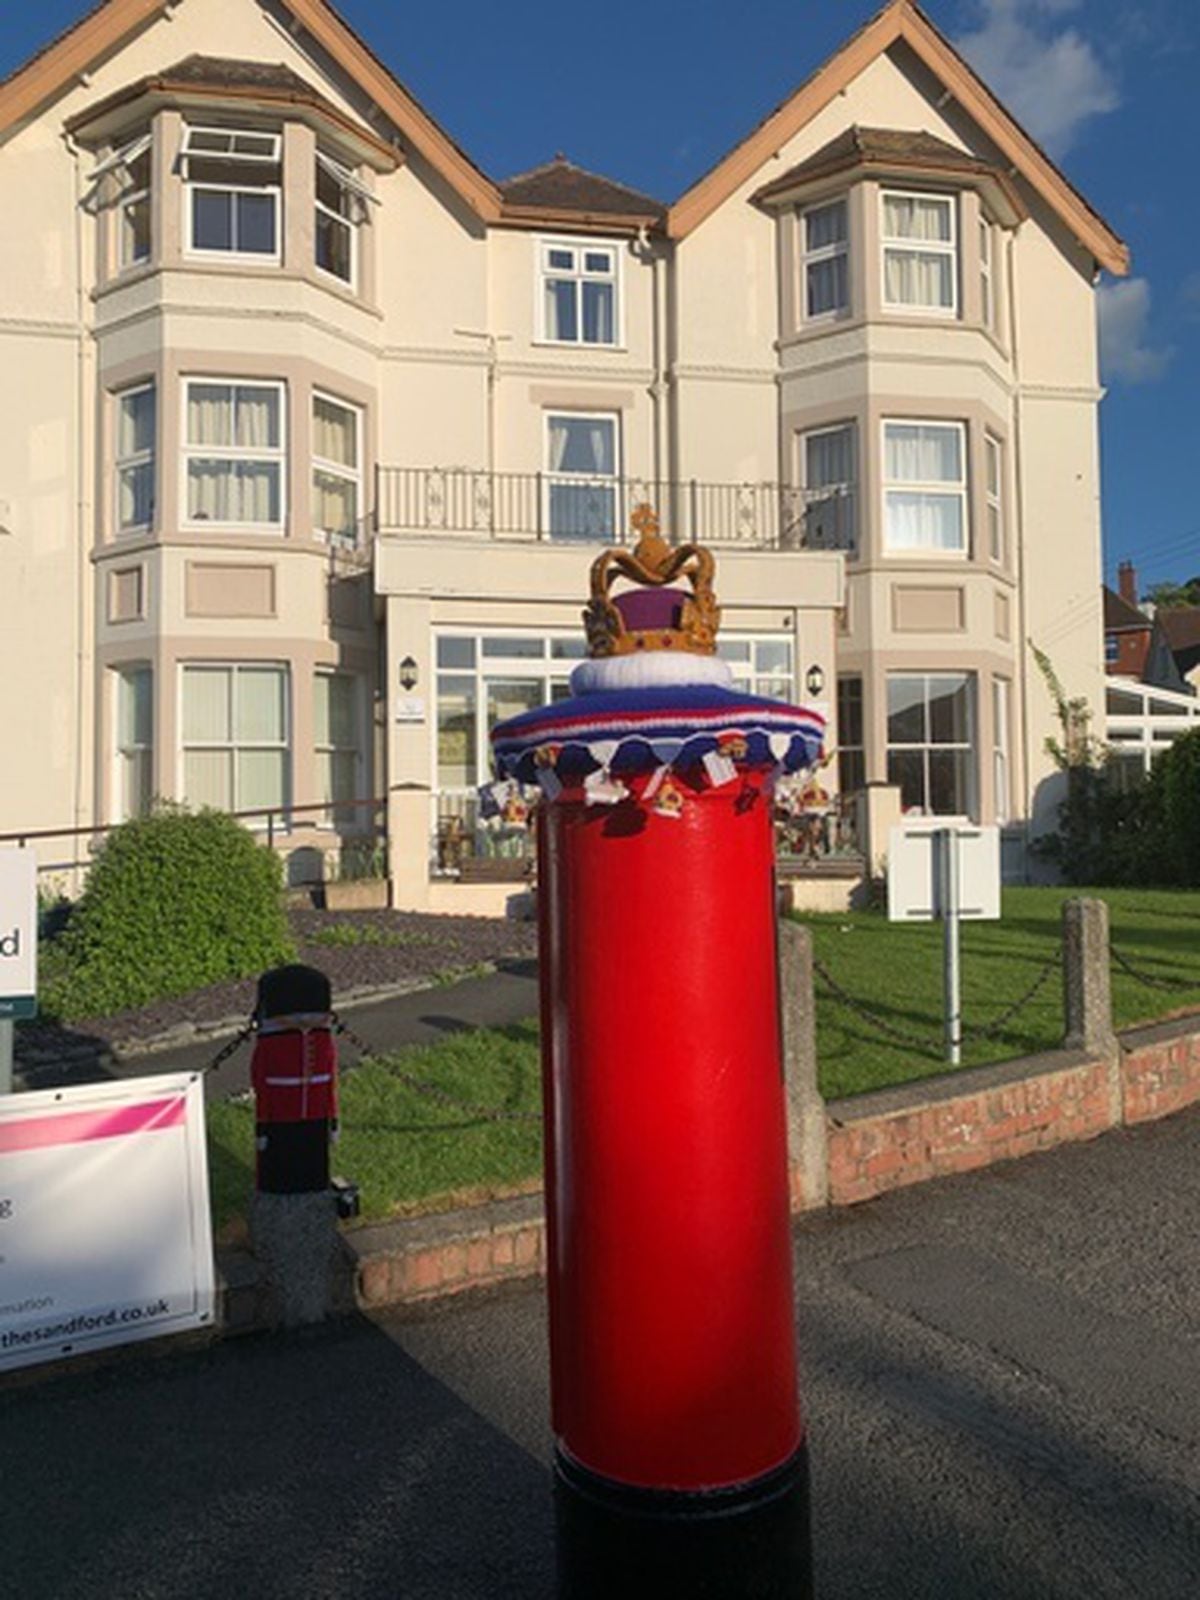  Post Box toppers in the form of a crown made by Laura Sutcliffe, from Church Stretton. 